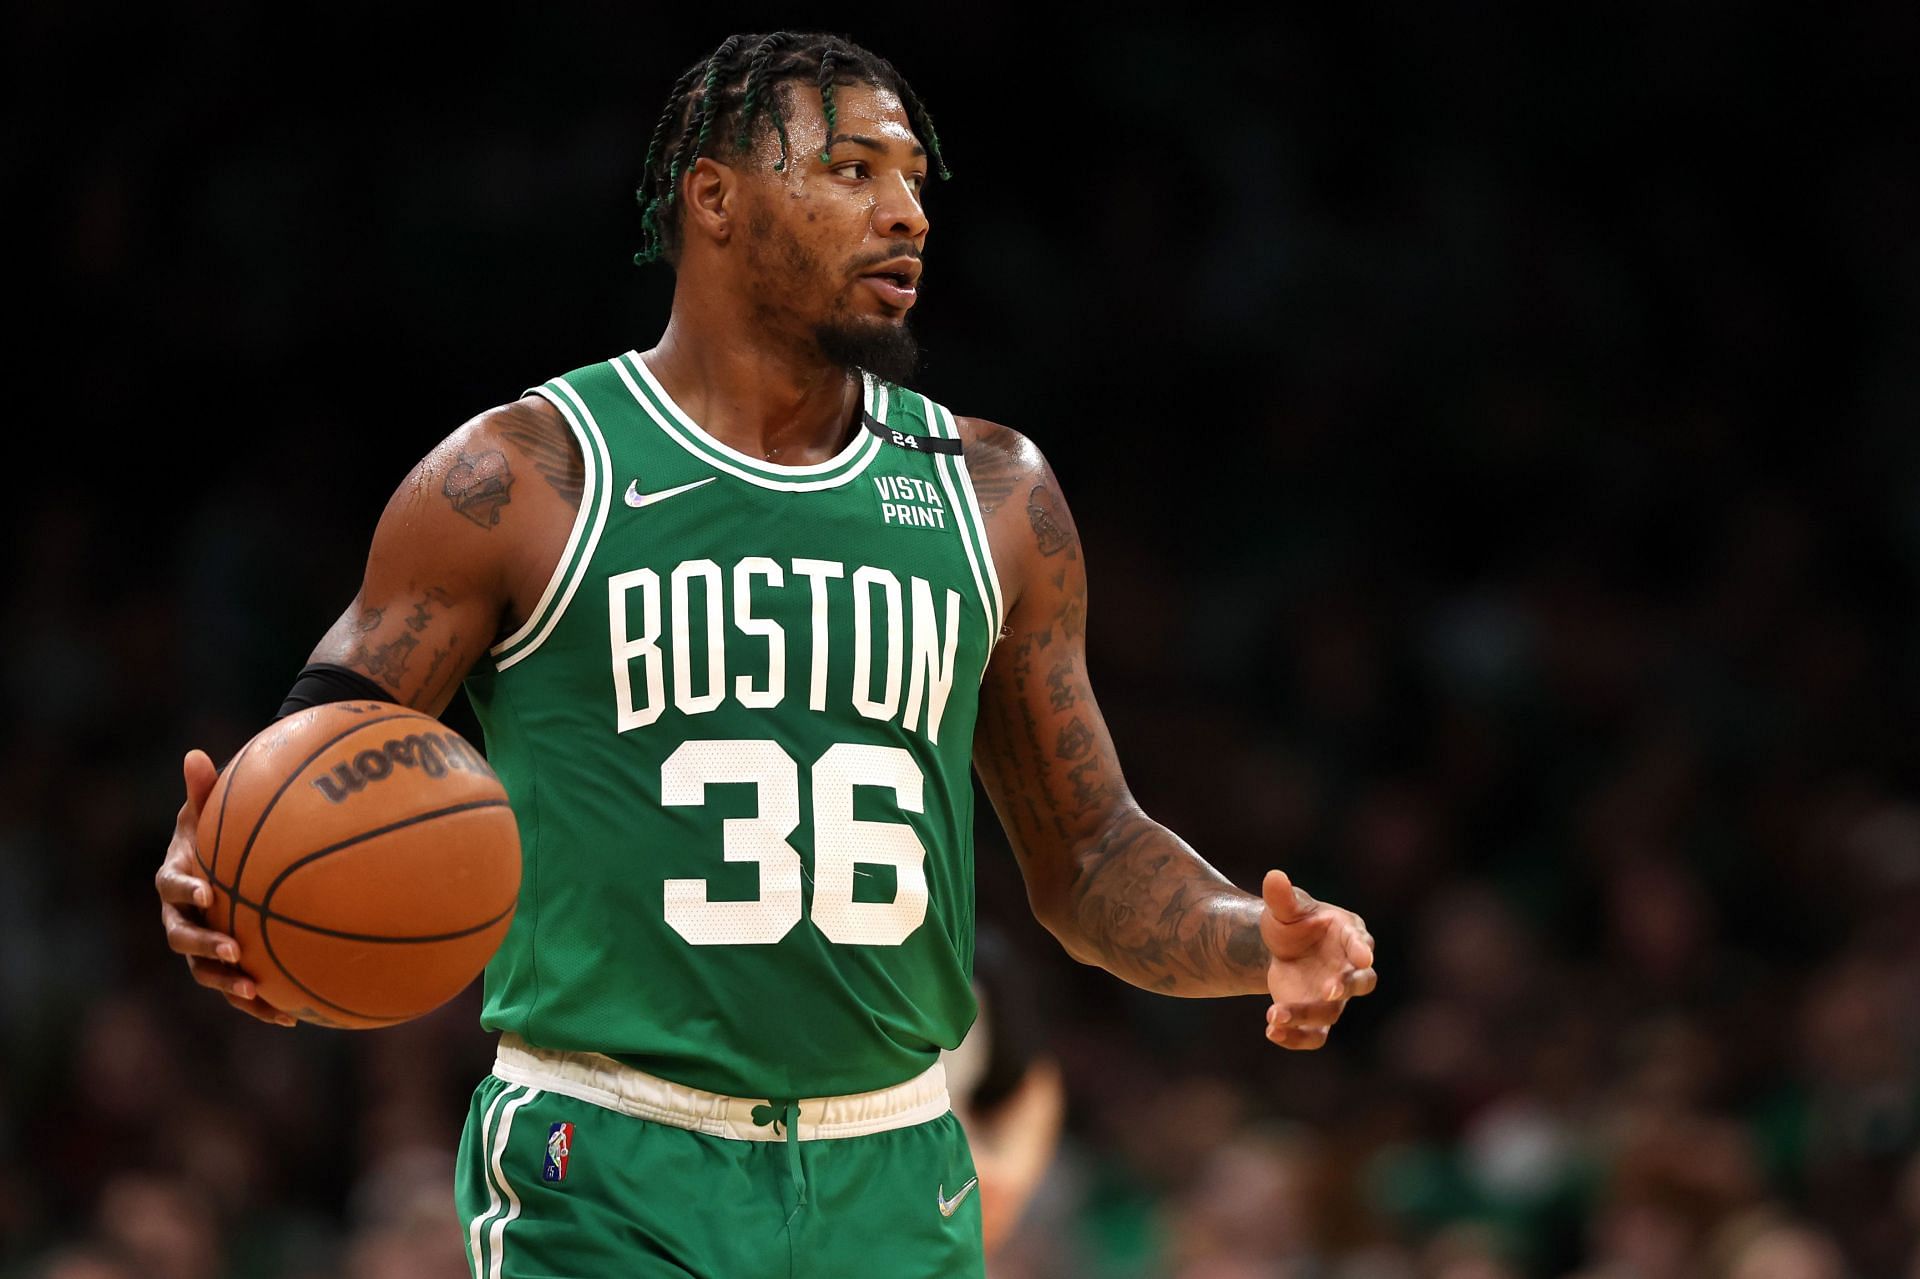 With his expected return tonight, Marcus Smart is the player to watch tonight.